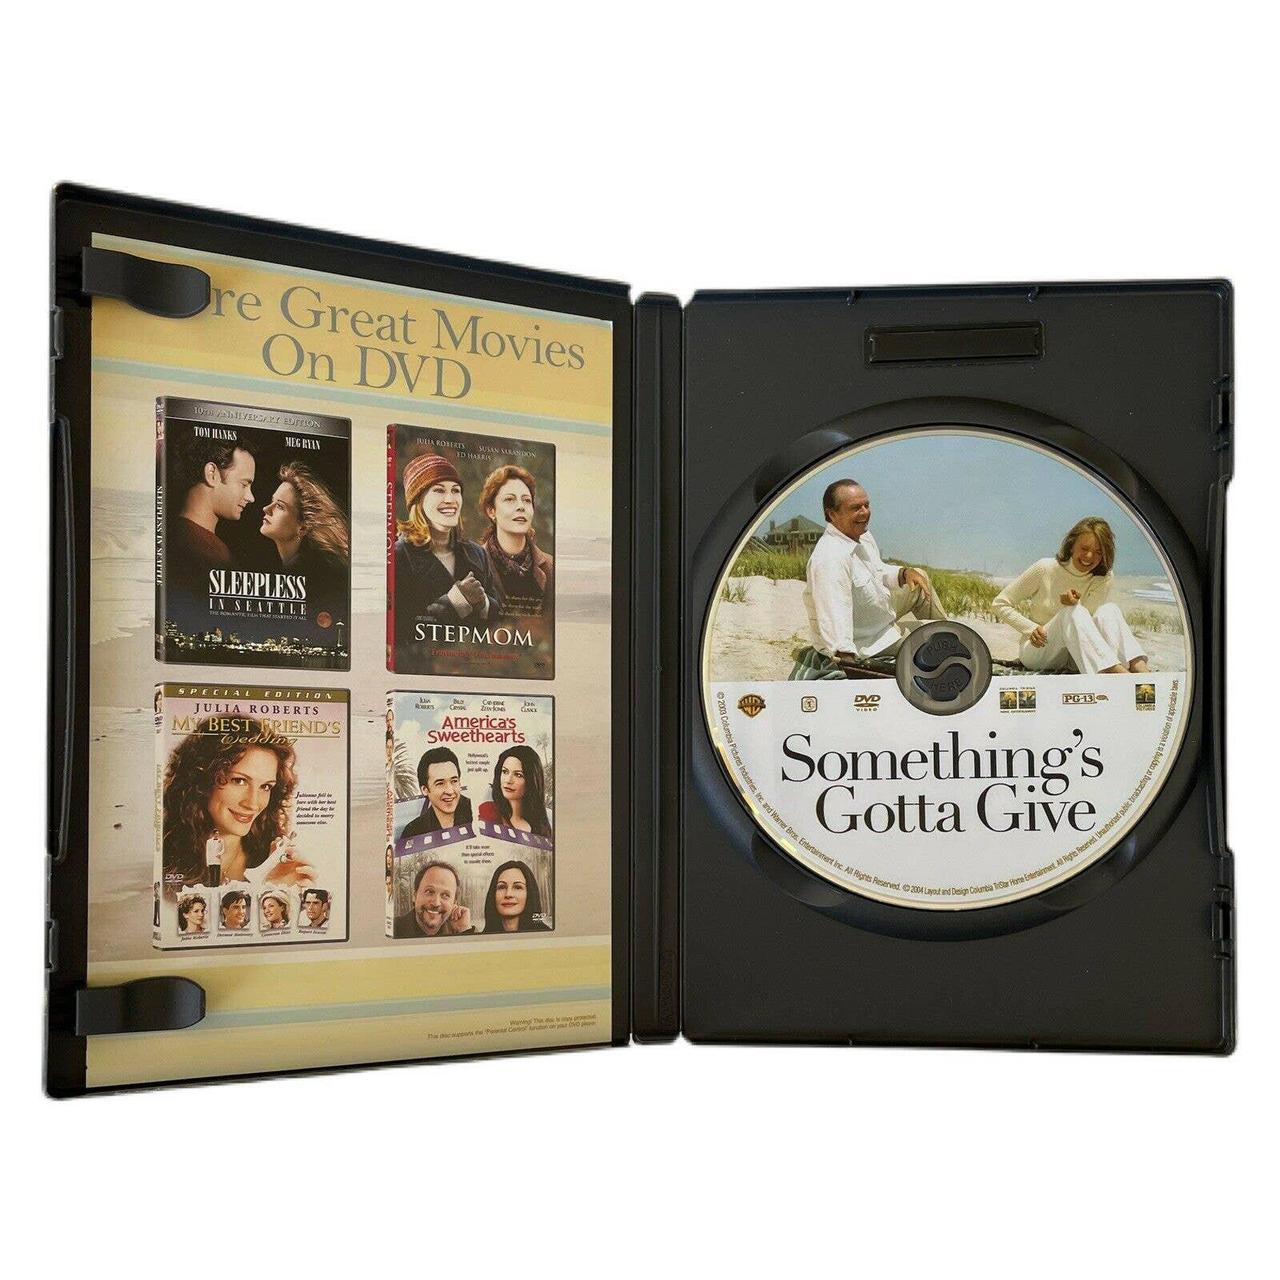 Product Image 2 - Somethings Gotta Give (DVD, 2004).